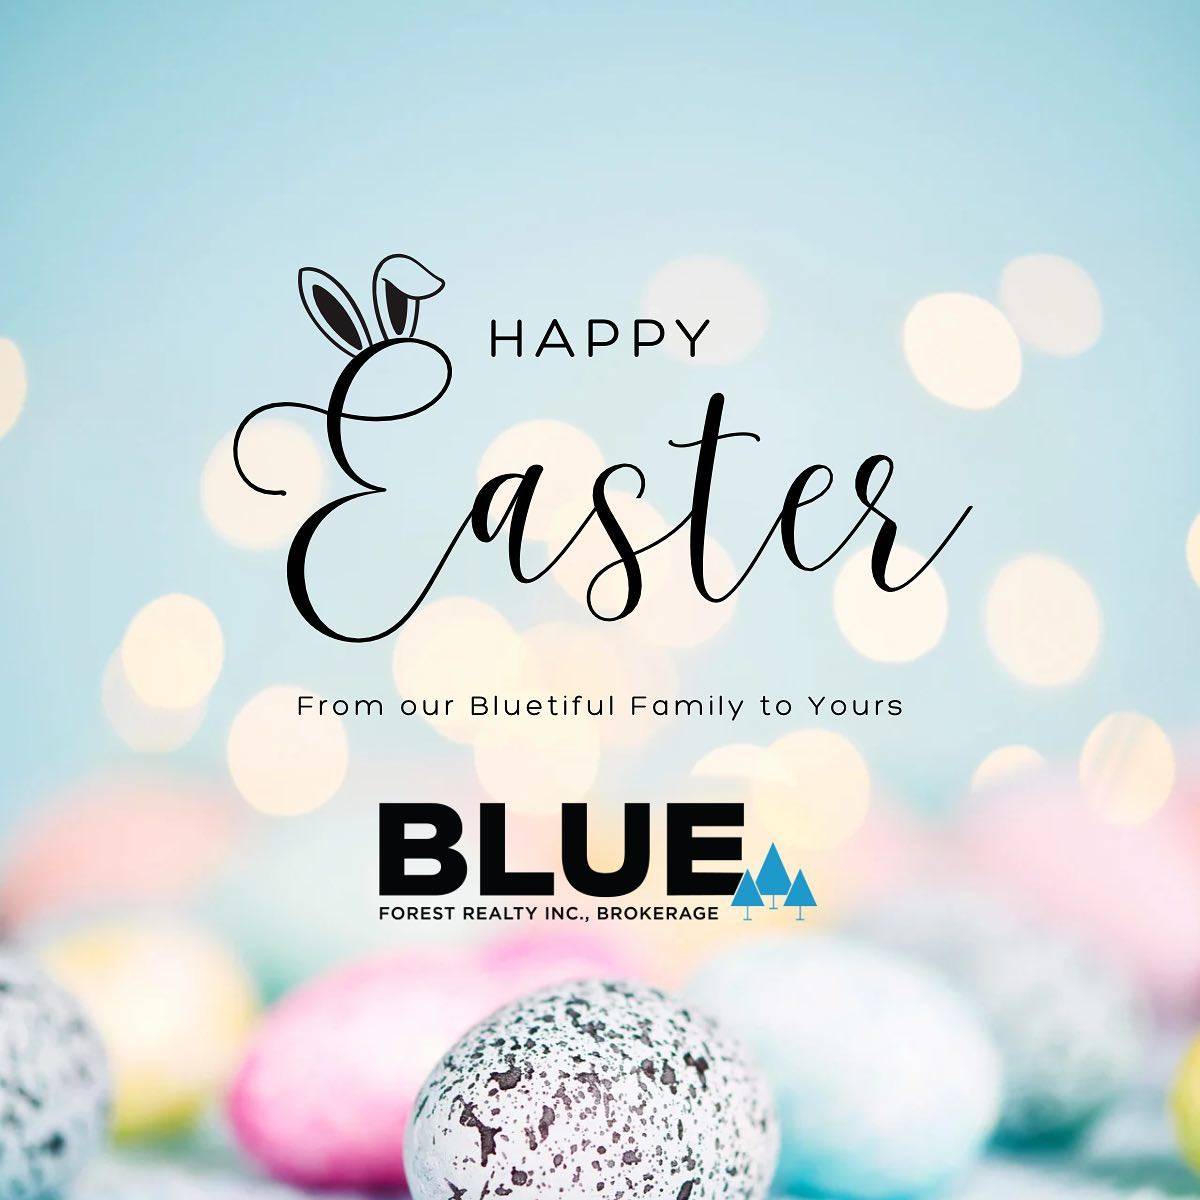 Happy egg hunting! Wishing you a wonderful day filled with chocolate and happiness. 🐣
.
.
#easter #blueforestrealty #ldnont
#realestate #realtoring #eastersunday